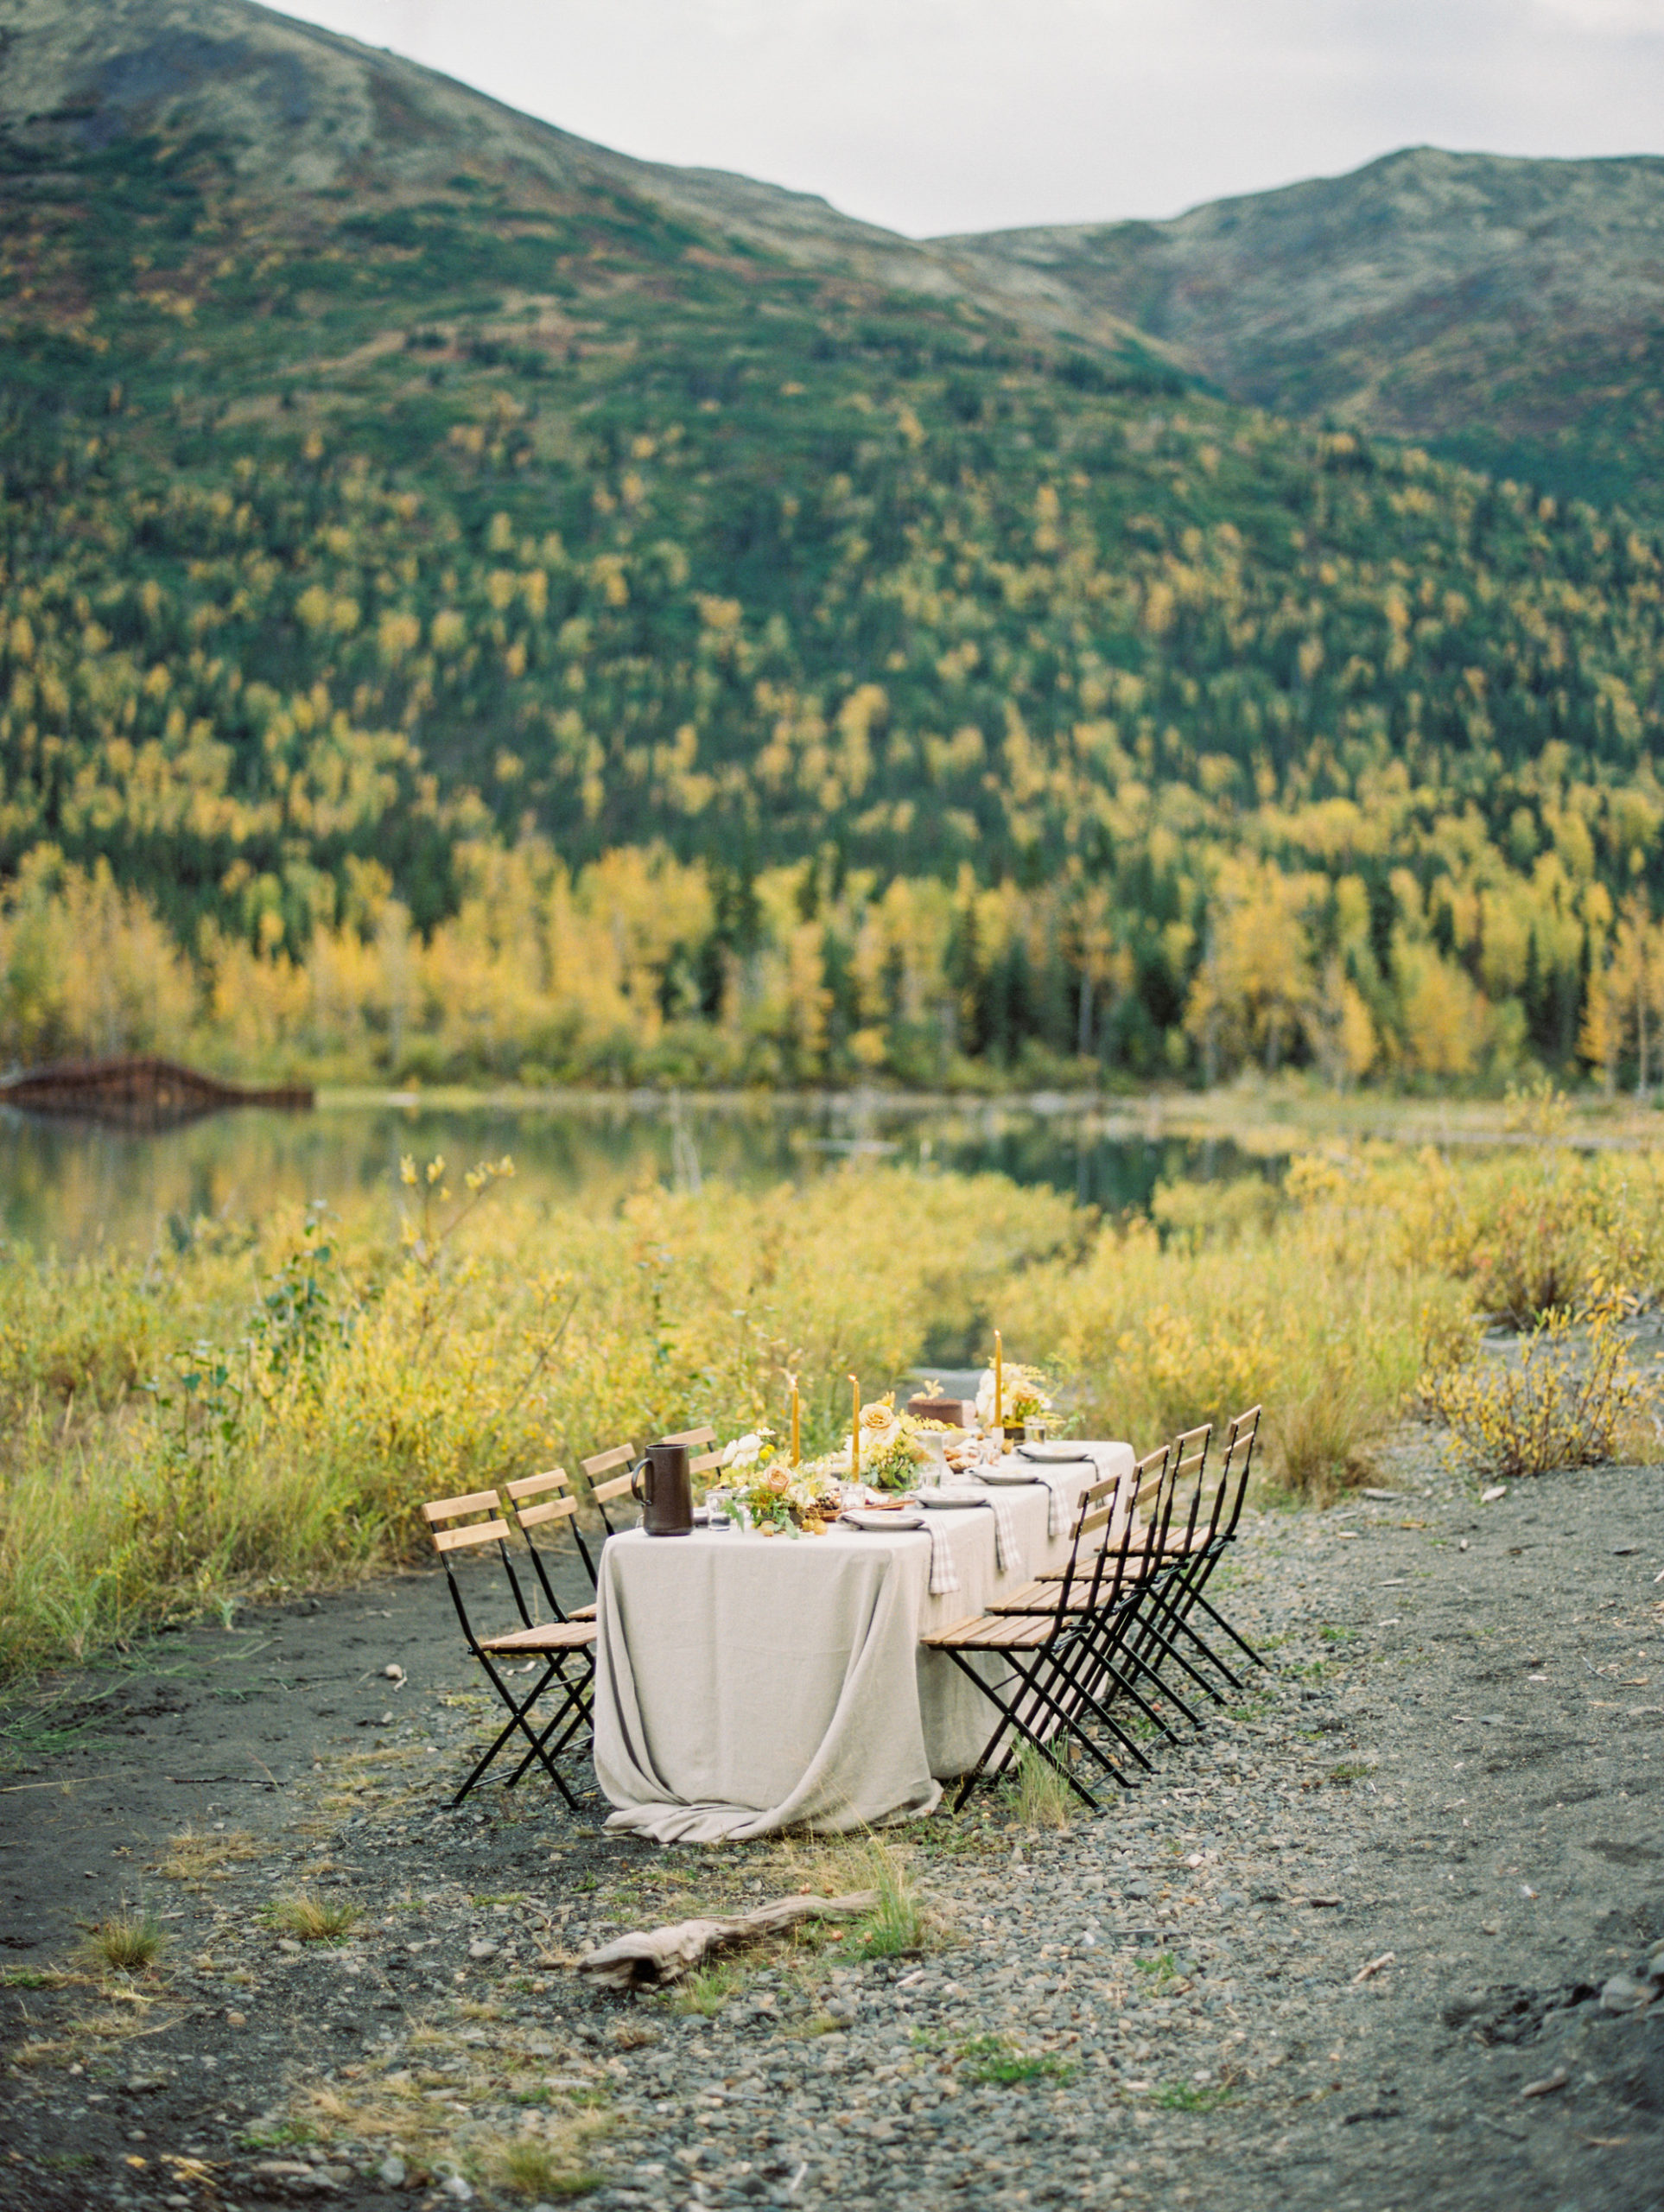 A fall table scape for a wedding, organic and natural in style. Location is Eklutna Lake, Alaska.